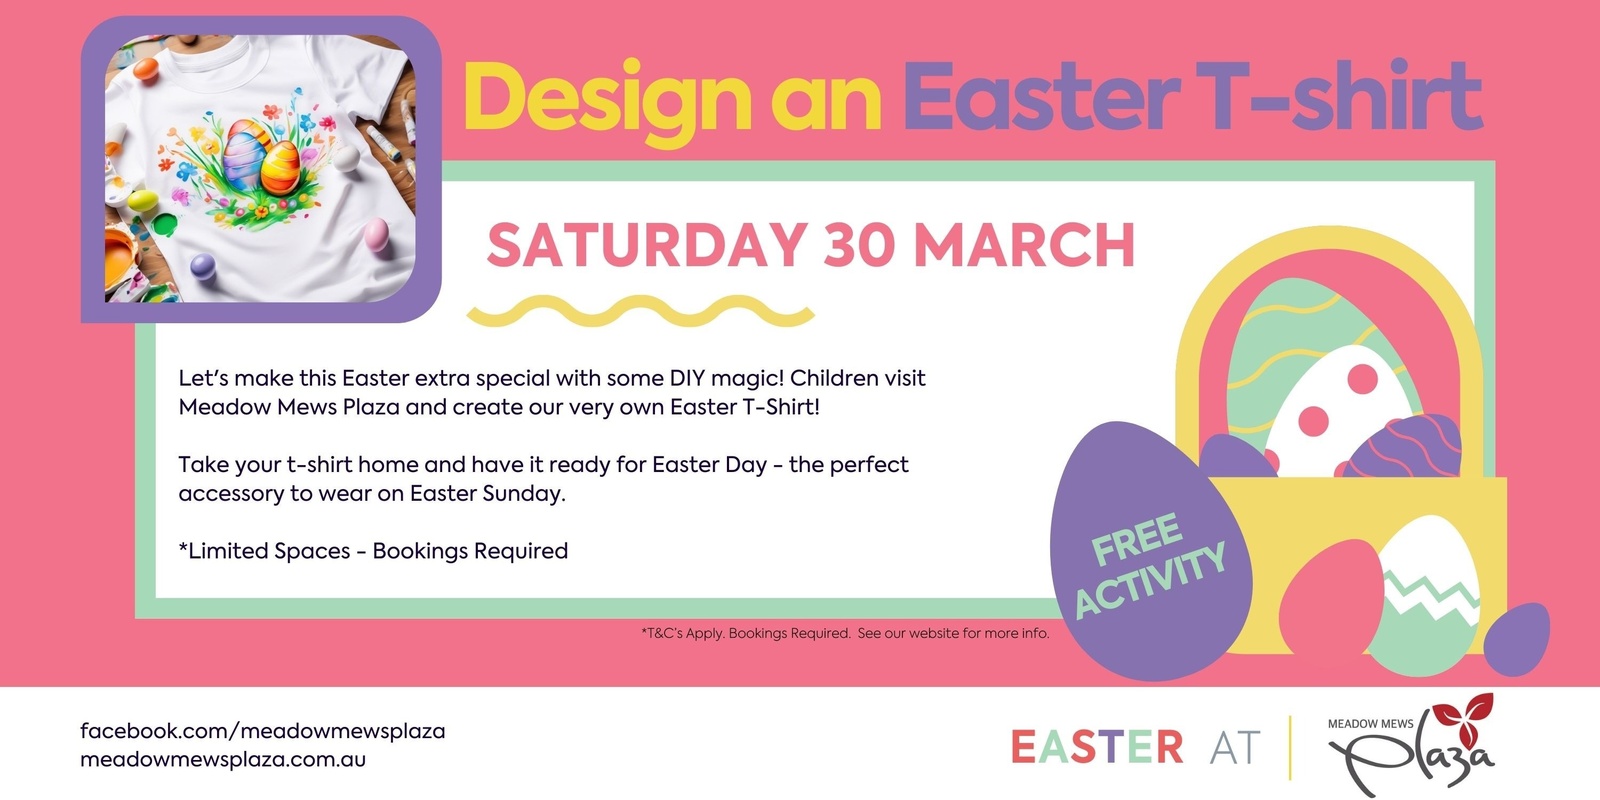 Banner image for Easter Fun @ Meadow Mews Plaza - Design your own Easter T-shirt